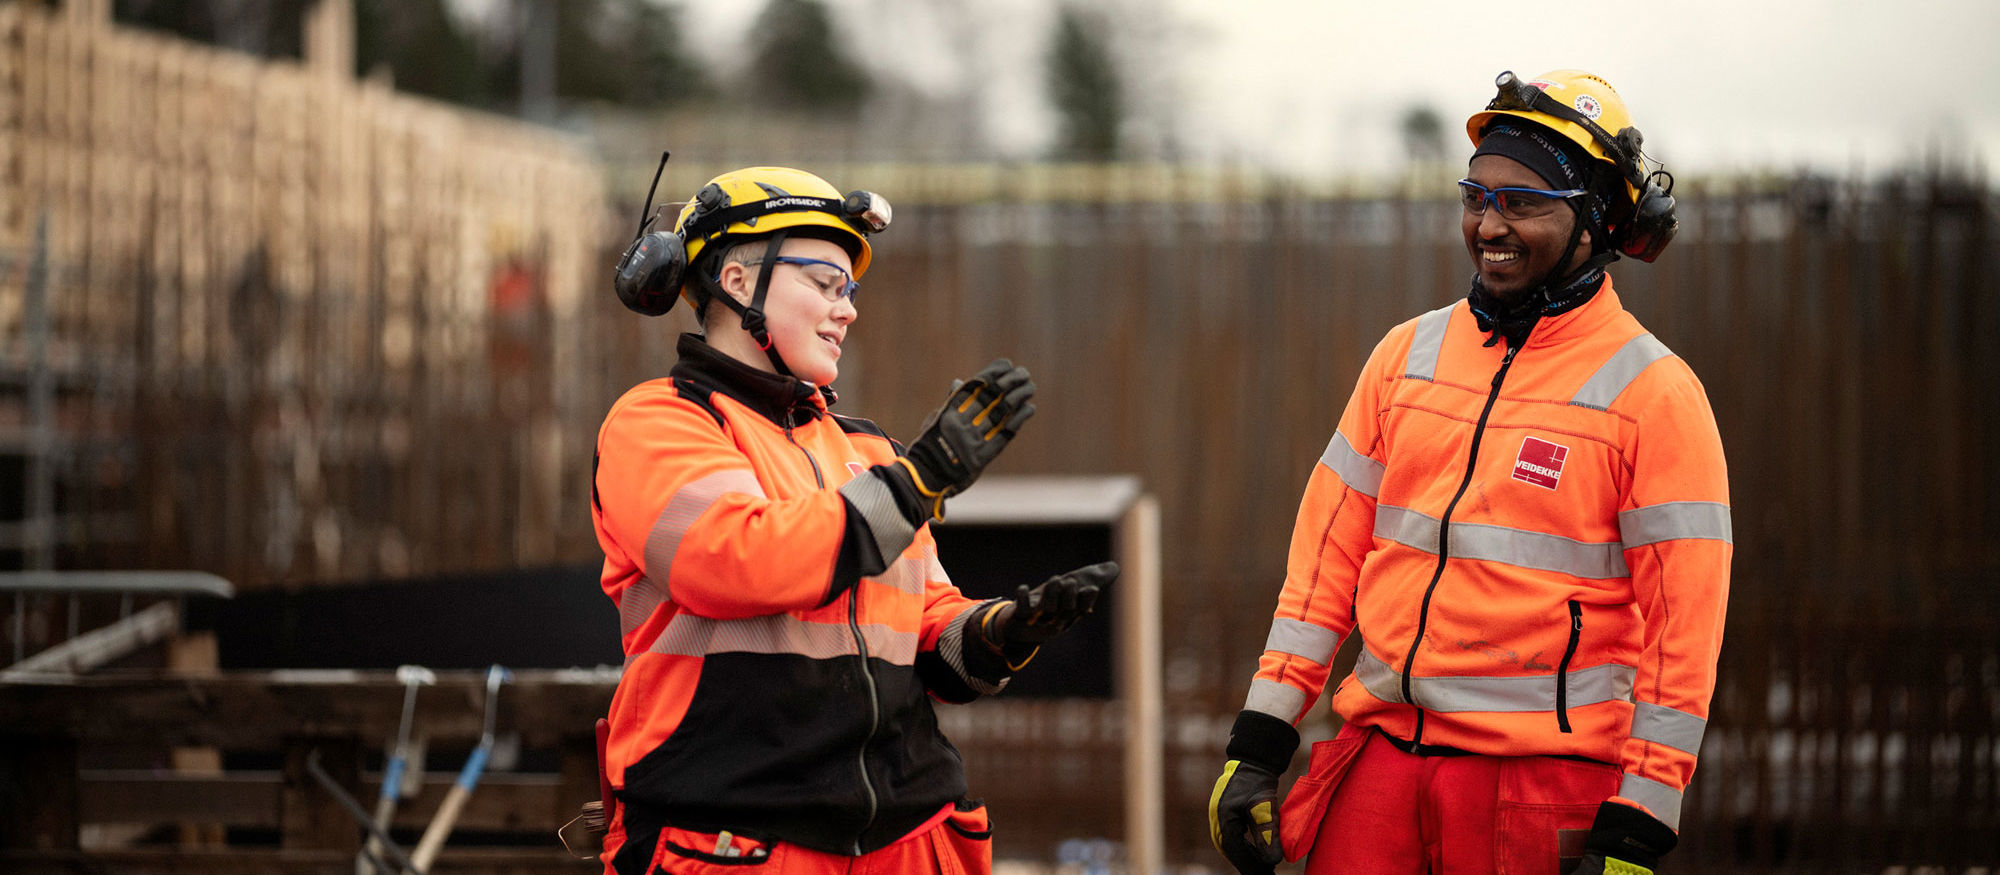 Man and woman chatting. Both wearing high-vis clothing. Photo.